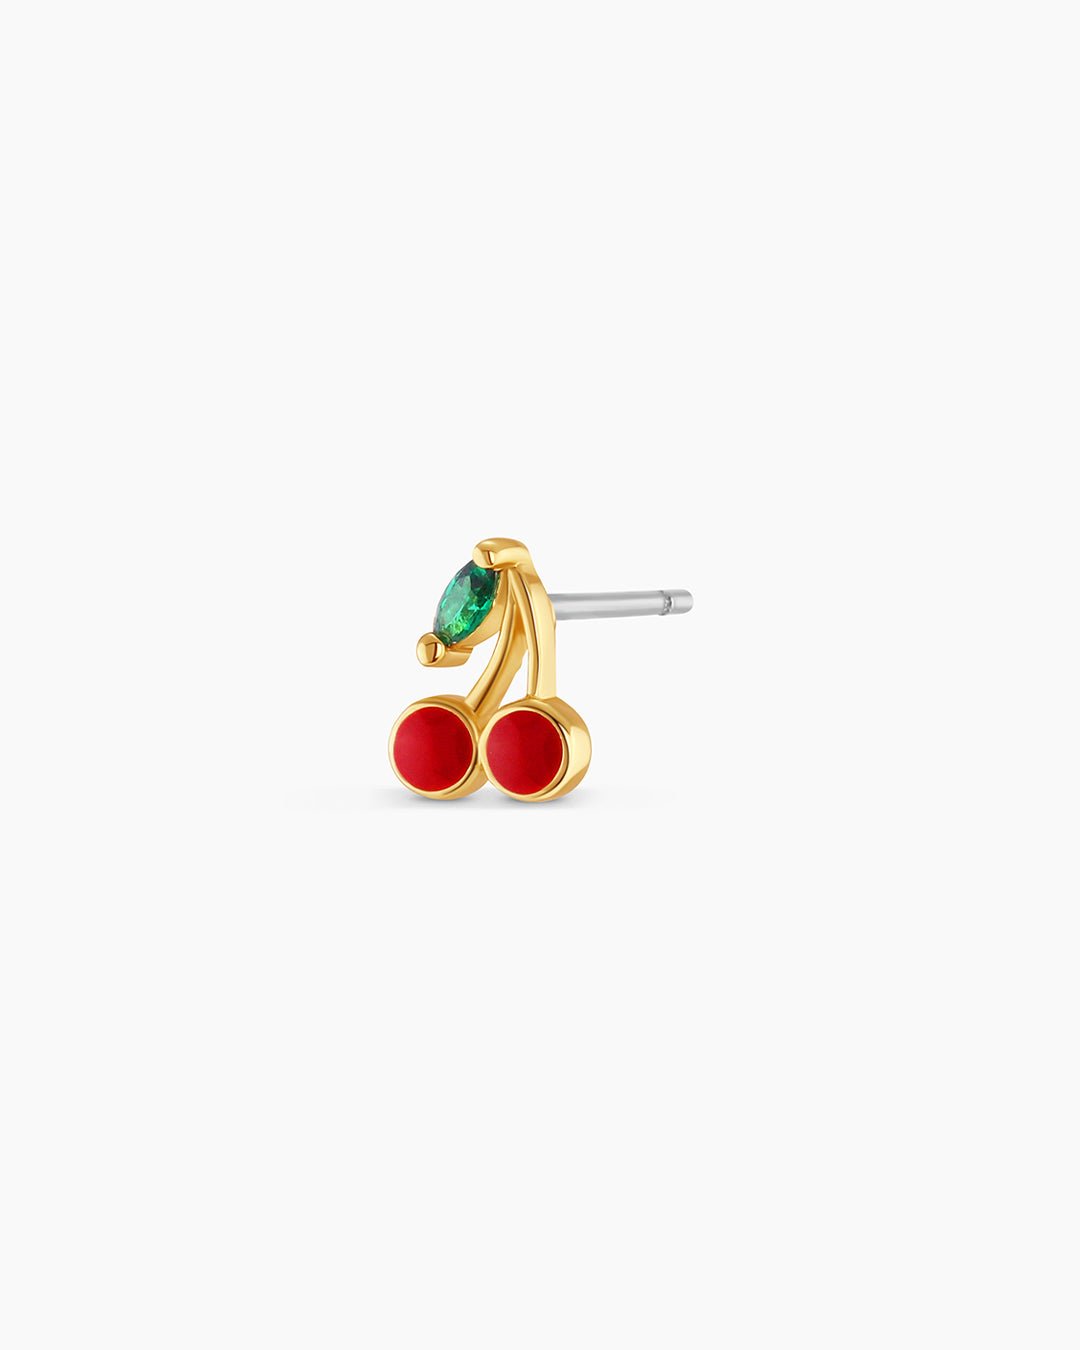  Cherry Charm Stud  Cherry Earrings || option::Gold Plated, Cherry